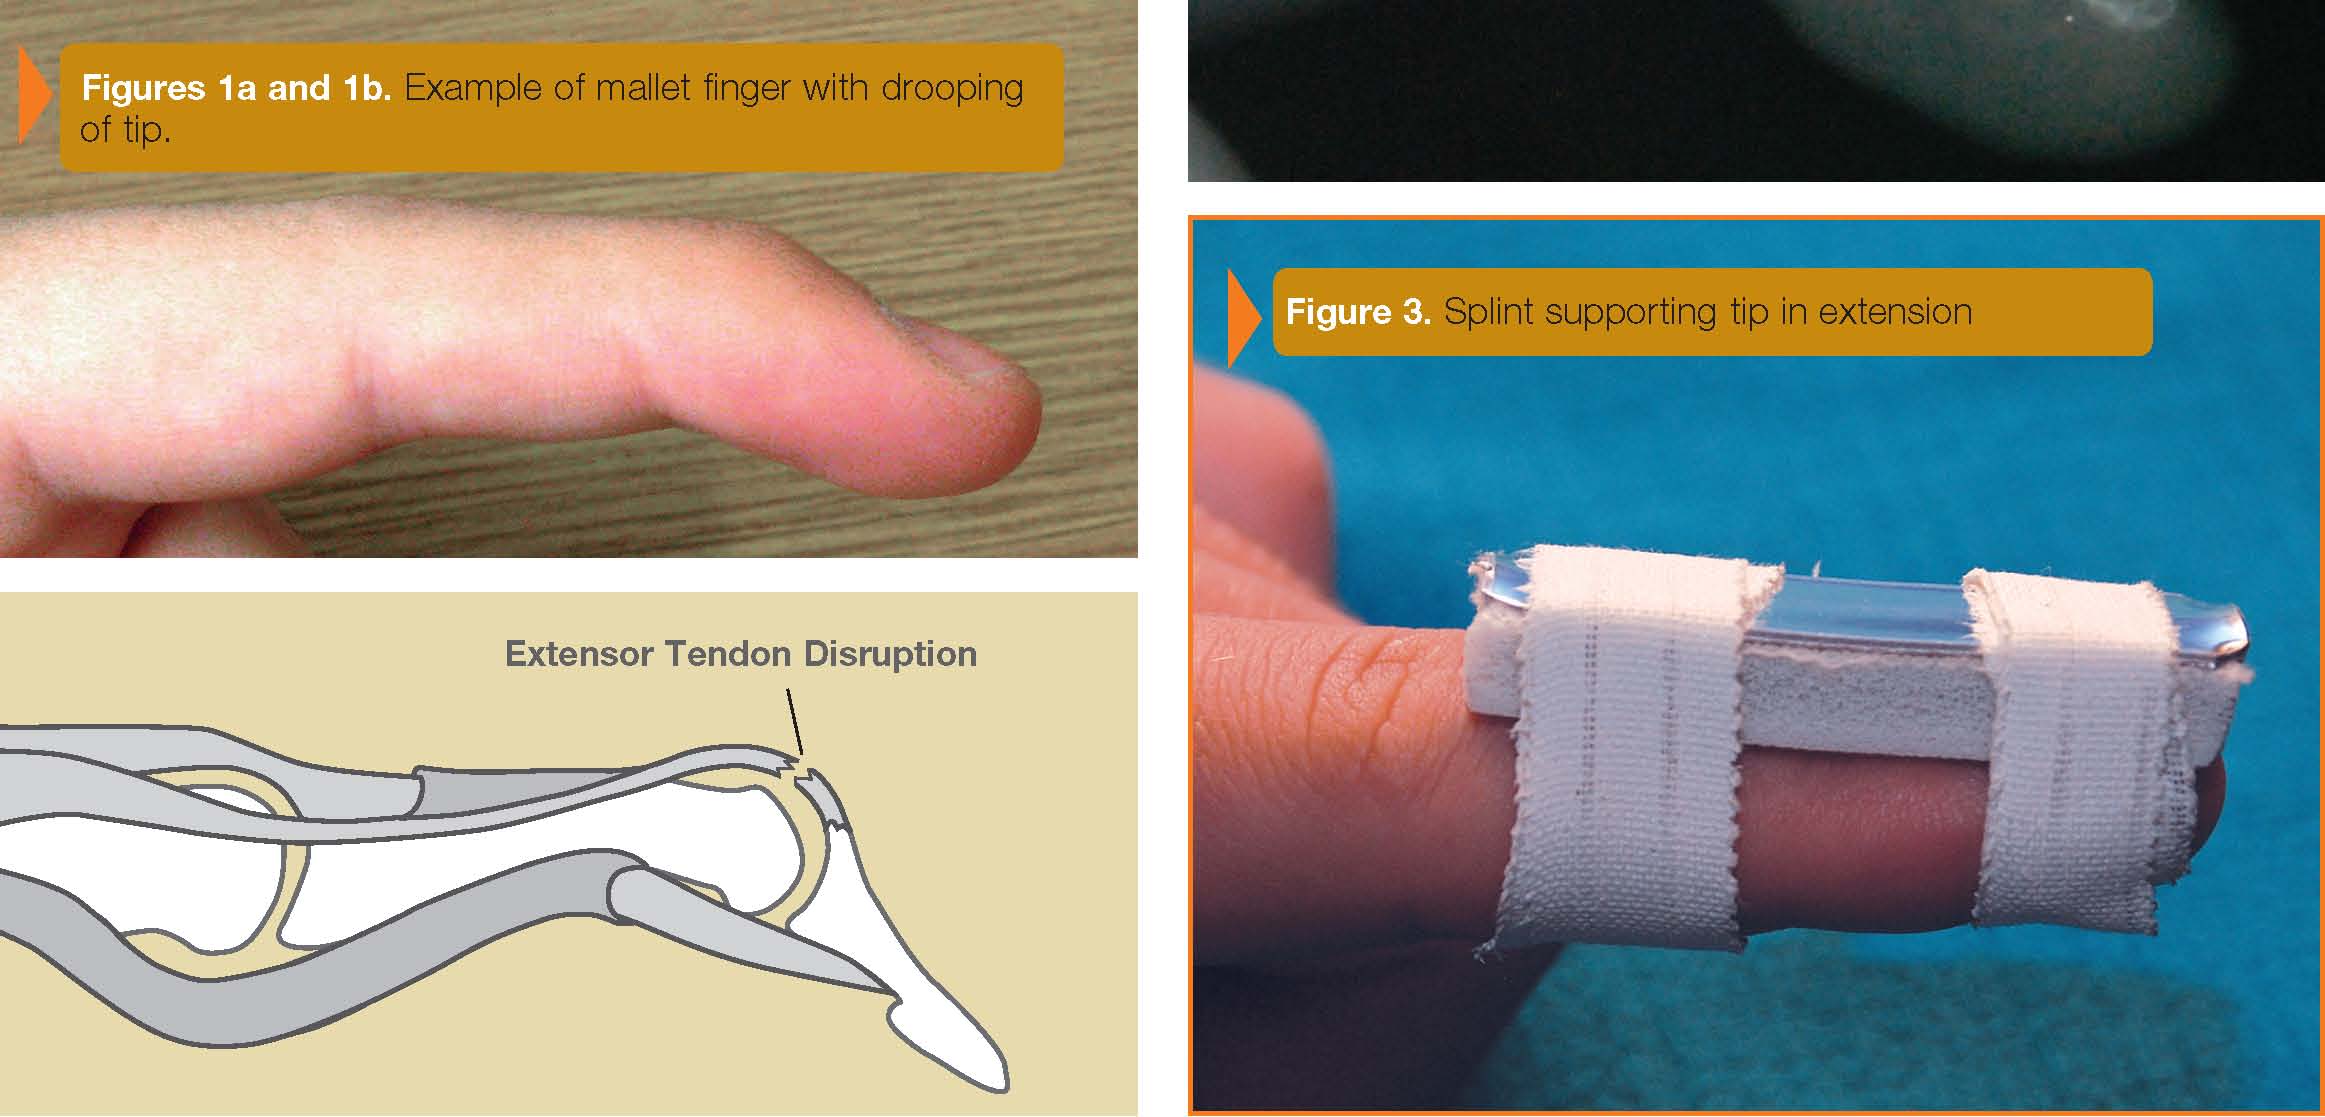 Will Mallet Finger Heal Without Surgery